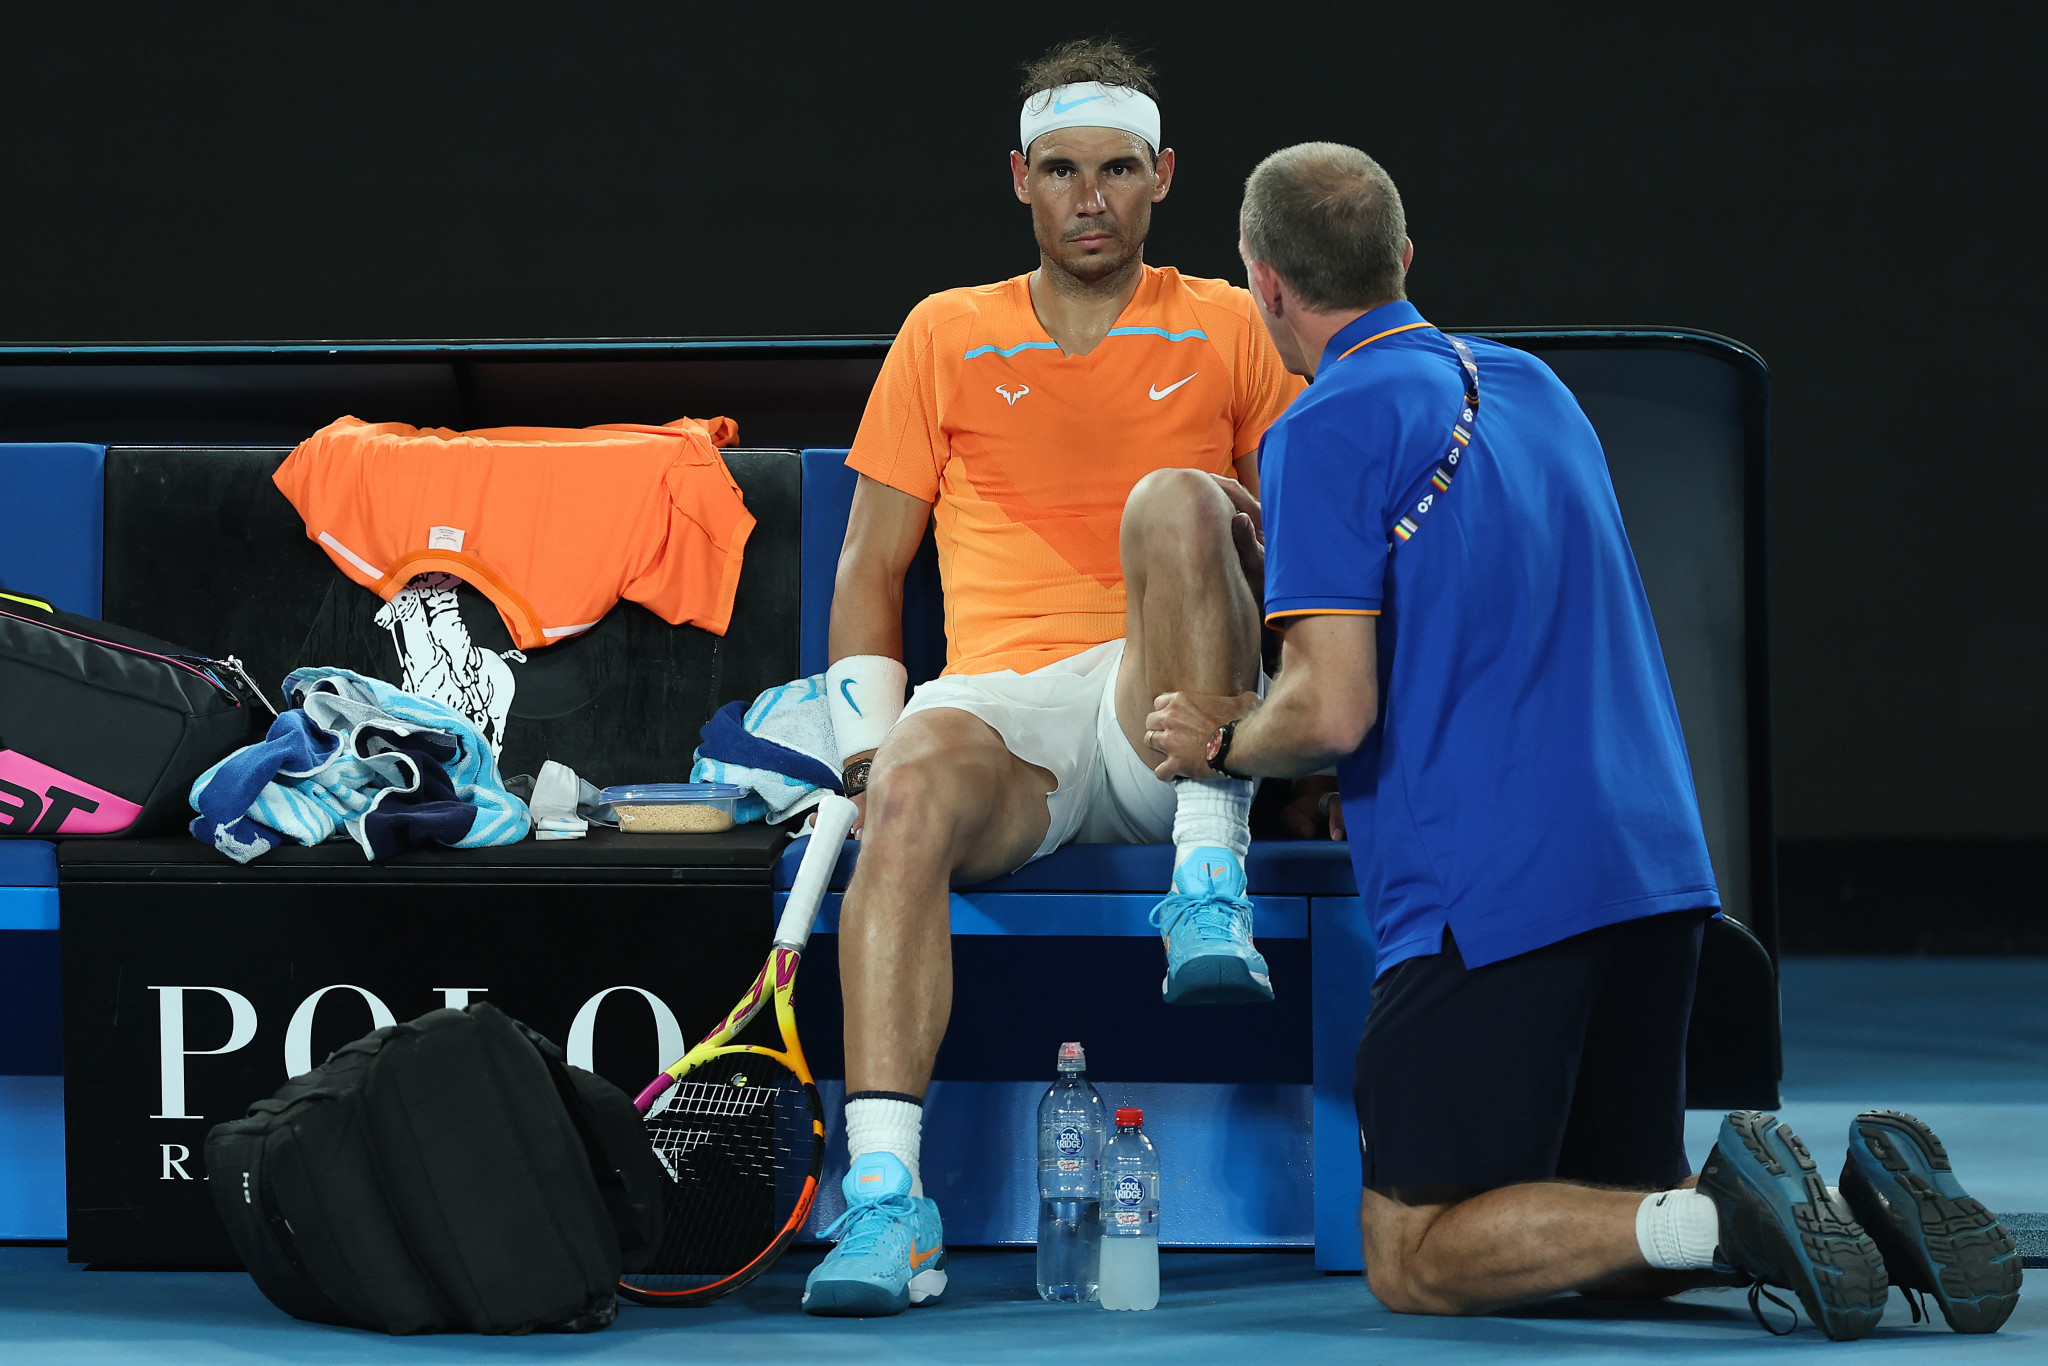 Top seed Nadal eliminated as weather impacts day three of Australian Open